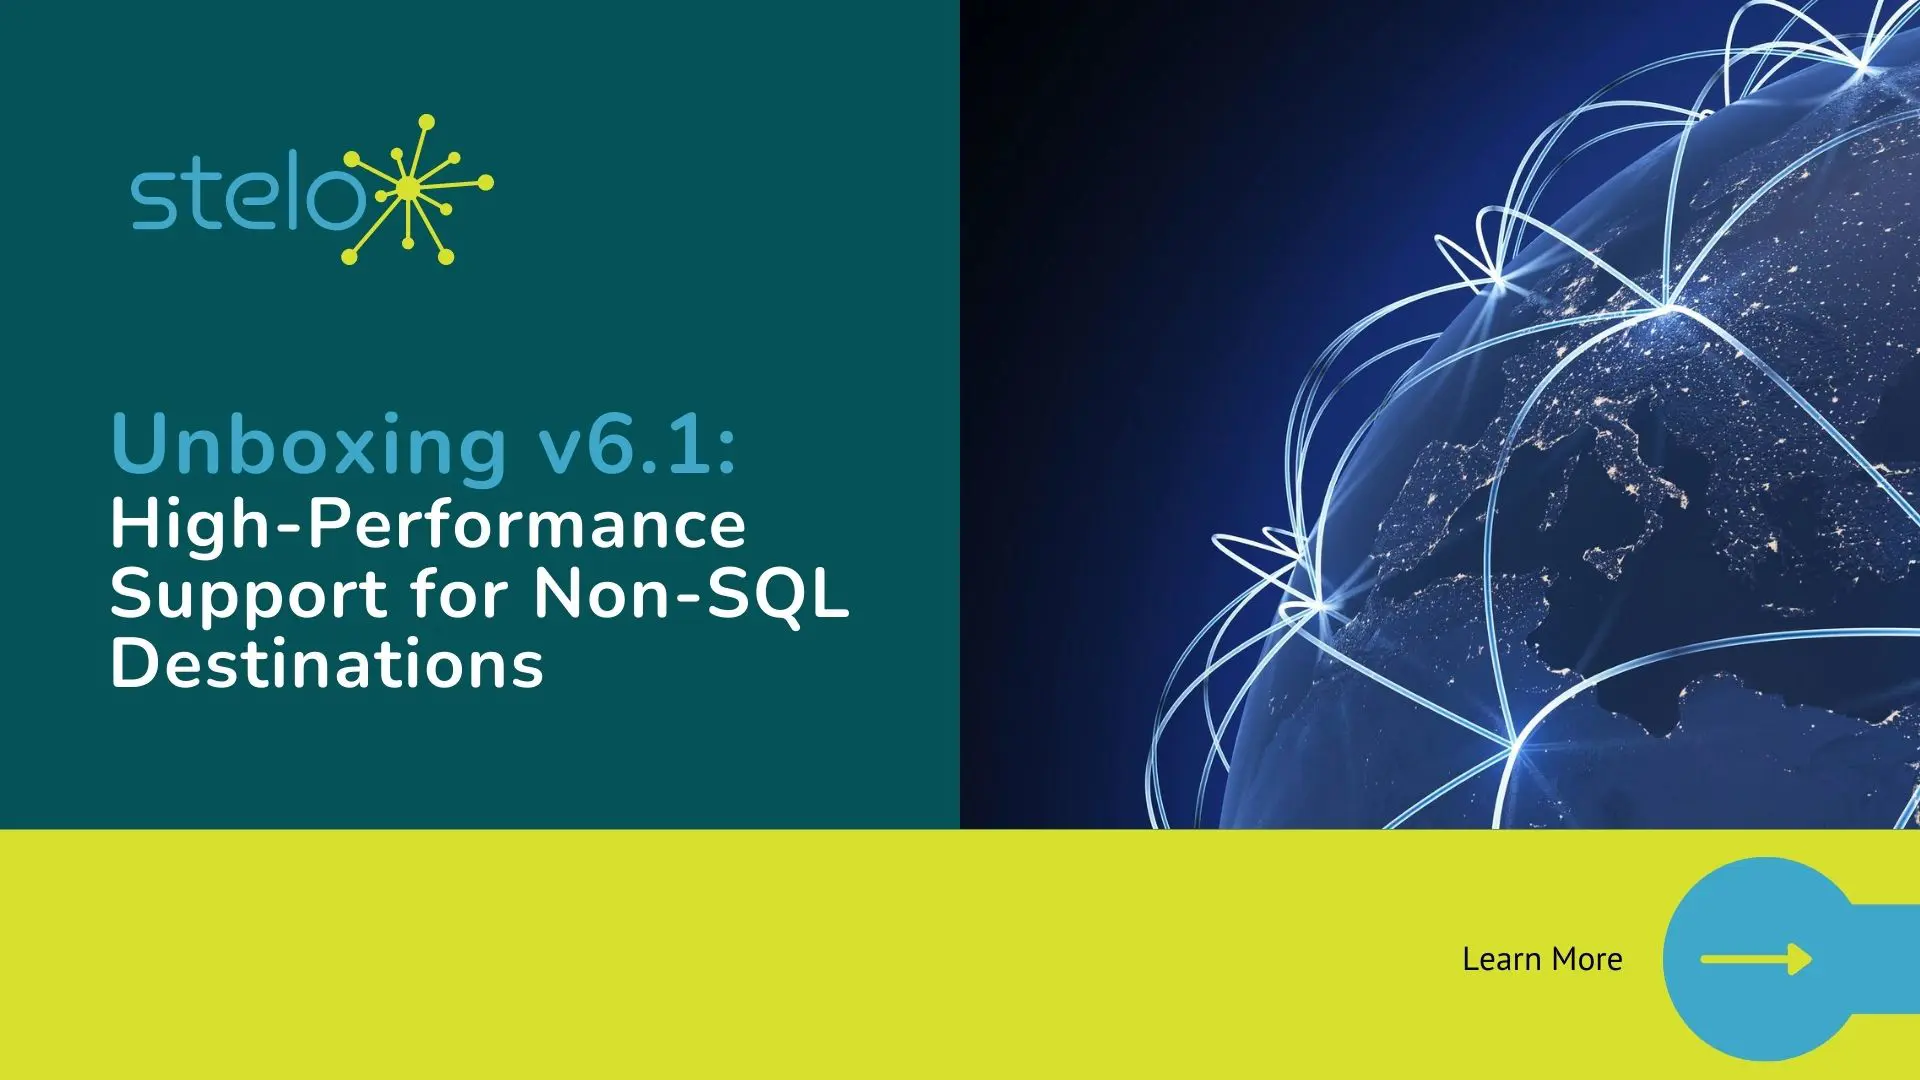 BLOG_High-Performance Support for Non-SQL Destinations_Social